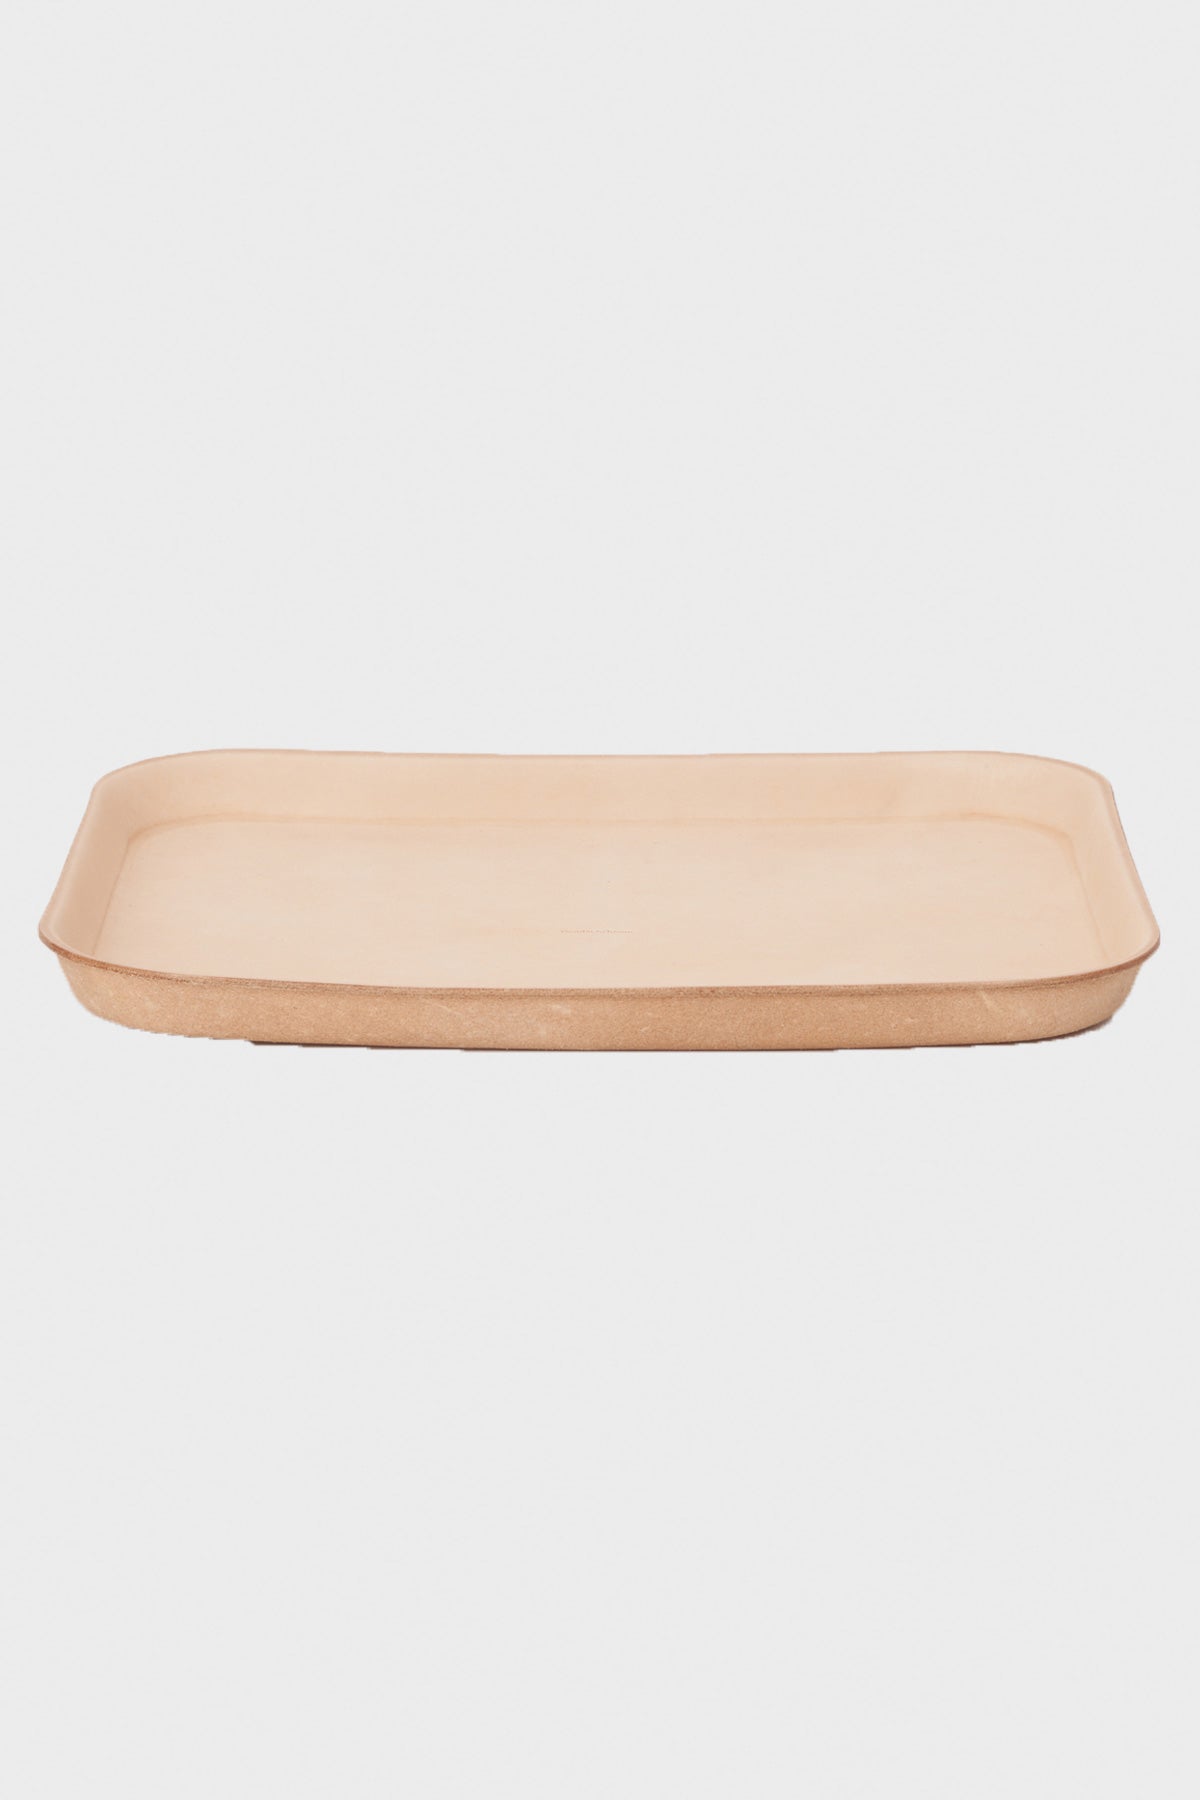 Hender Scheme Large Leather Tray | Natural | Canoe Club